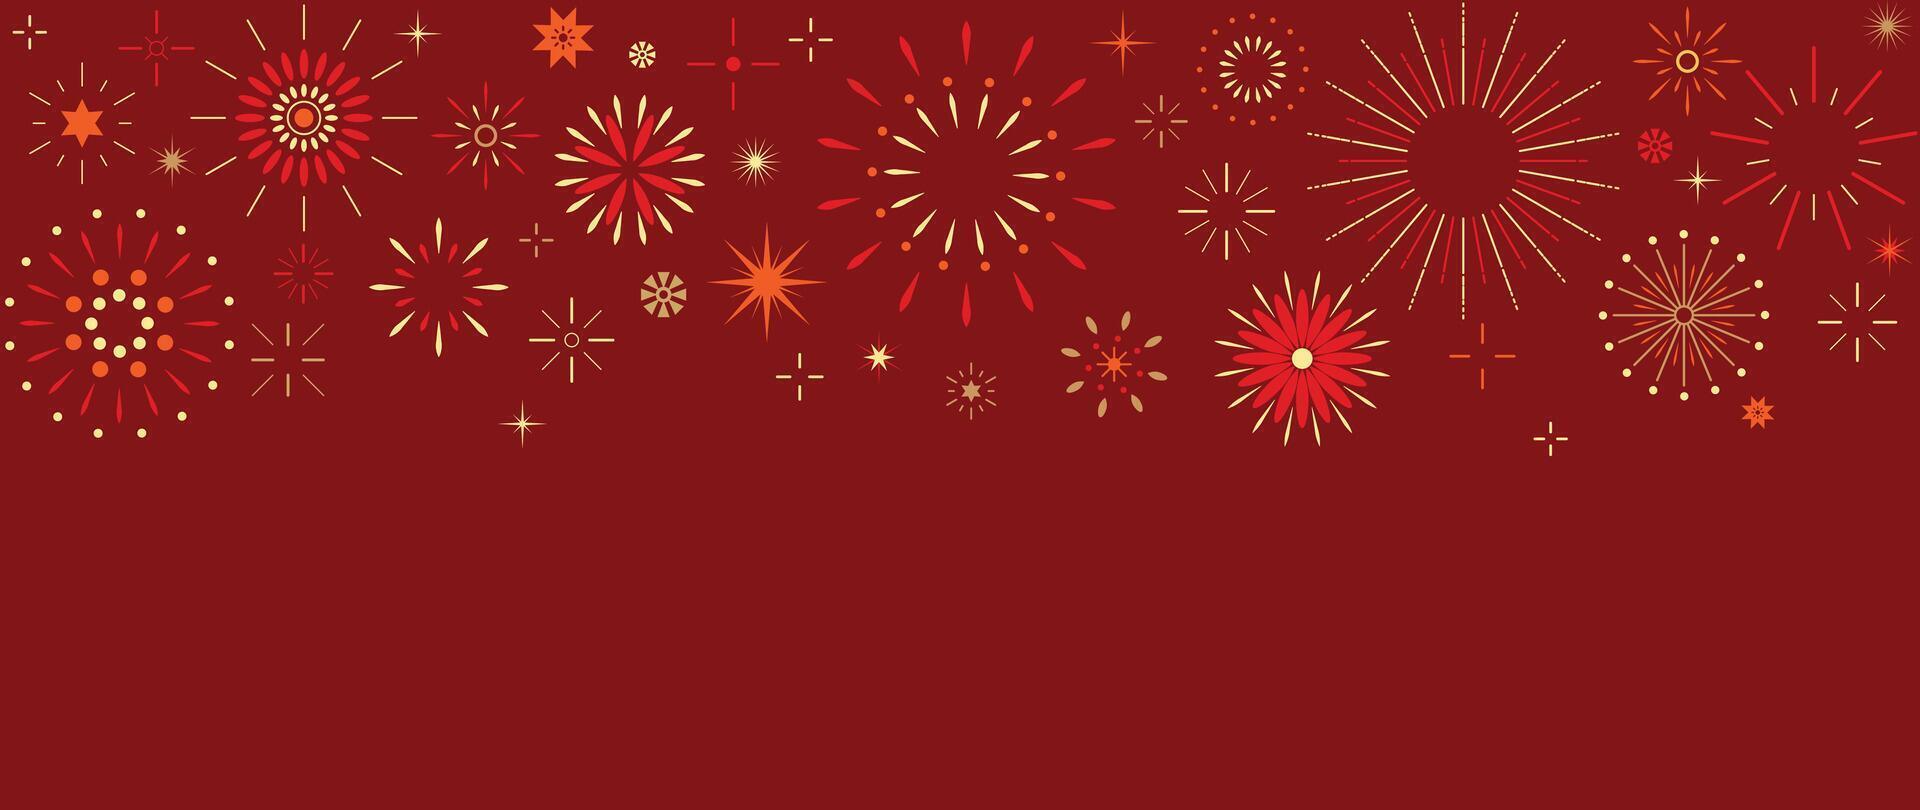 Festival chinese backdrop vector. Happy chinese new year wallpaper design with golden fireworks on red background. Modern luxury oriental illustration for cover, banner, website, decor, advert. vector